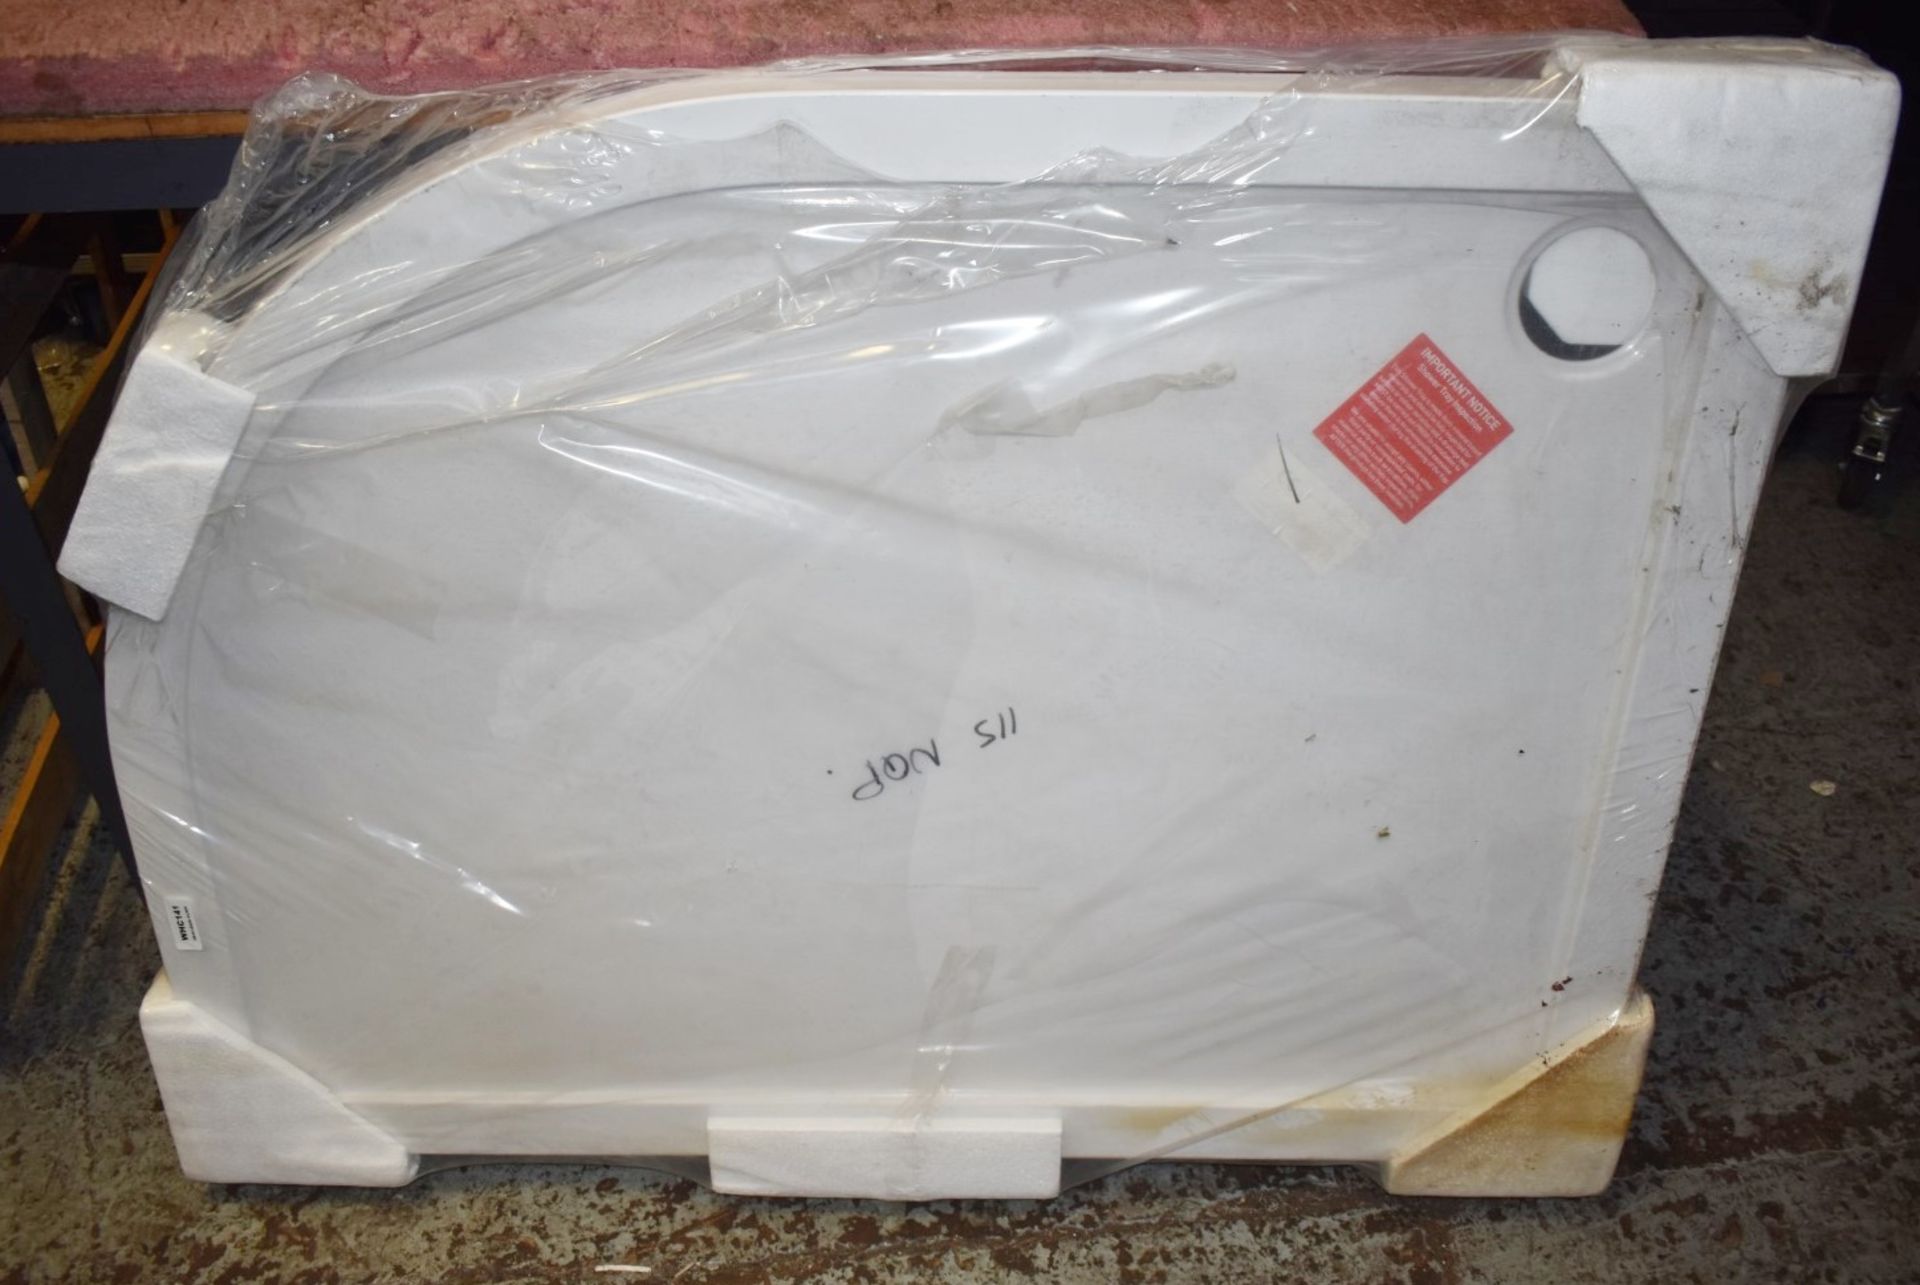 1 x Offset Quadrant Stone Shower Tray - New in Packet - Ref WHC141 WH1 - CL011 - Location: - Image 2 of 2